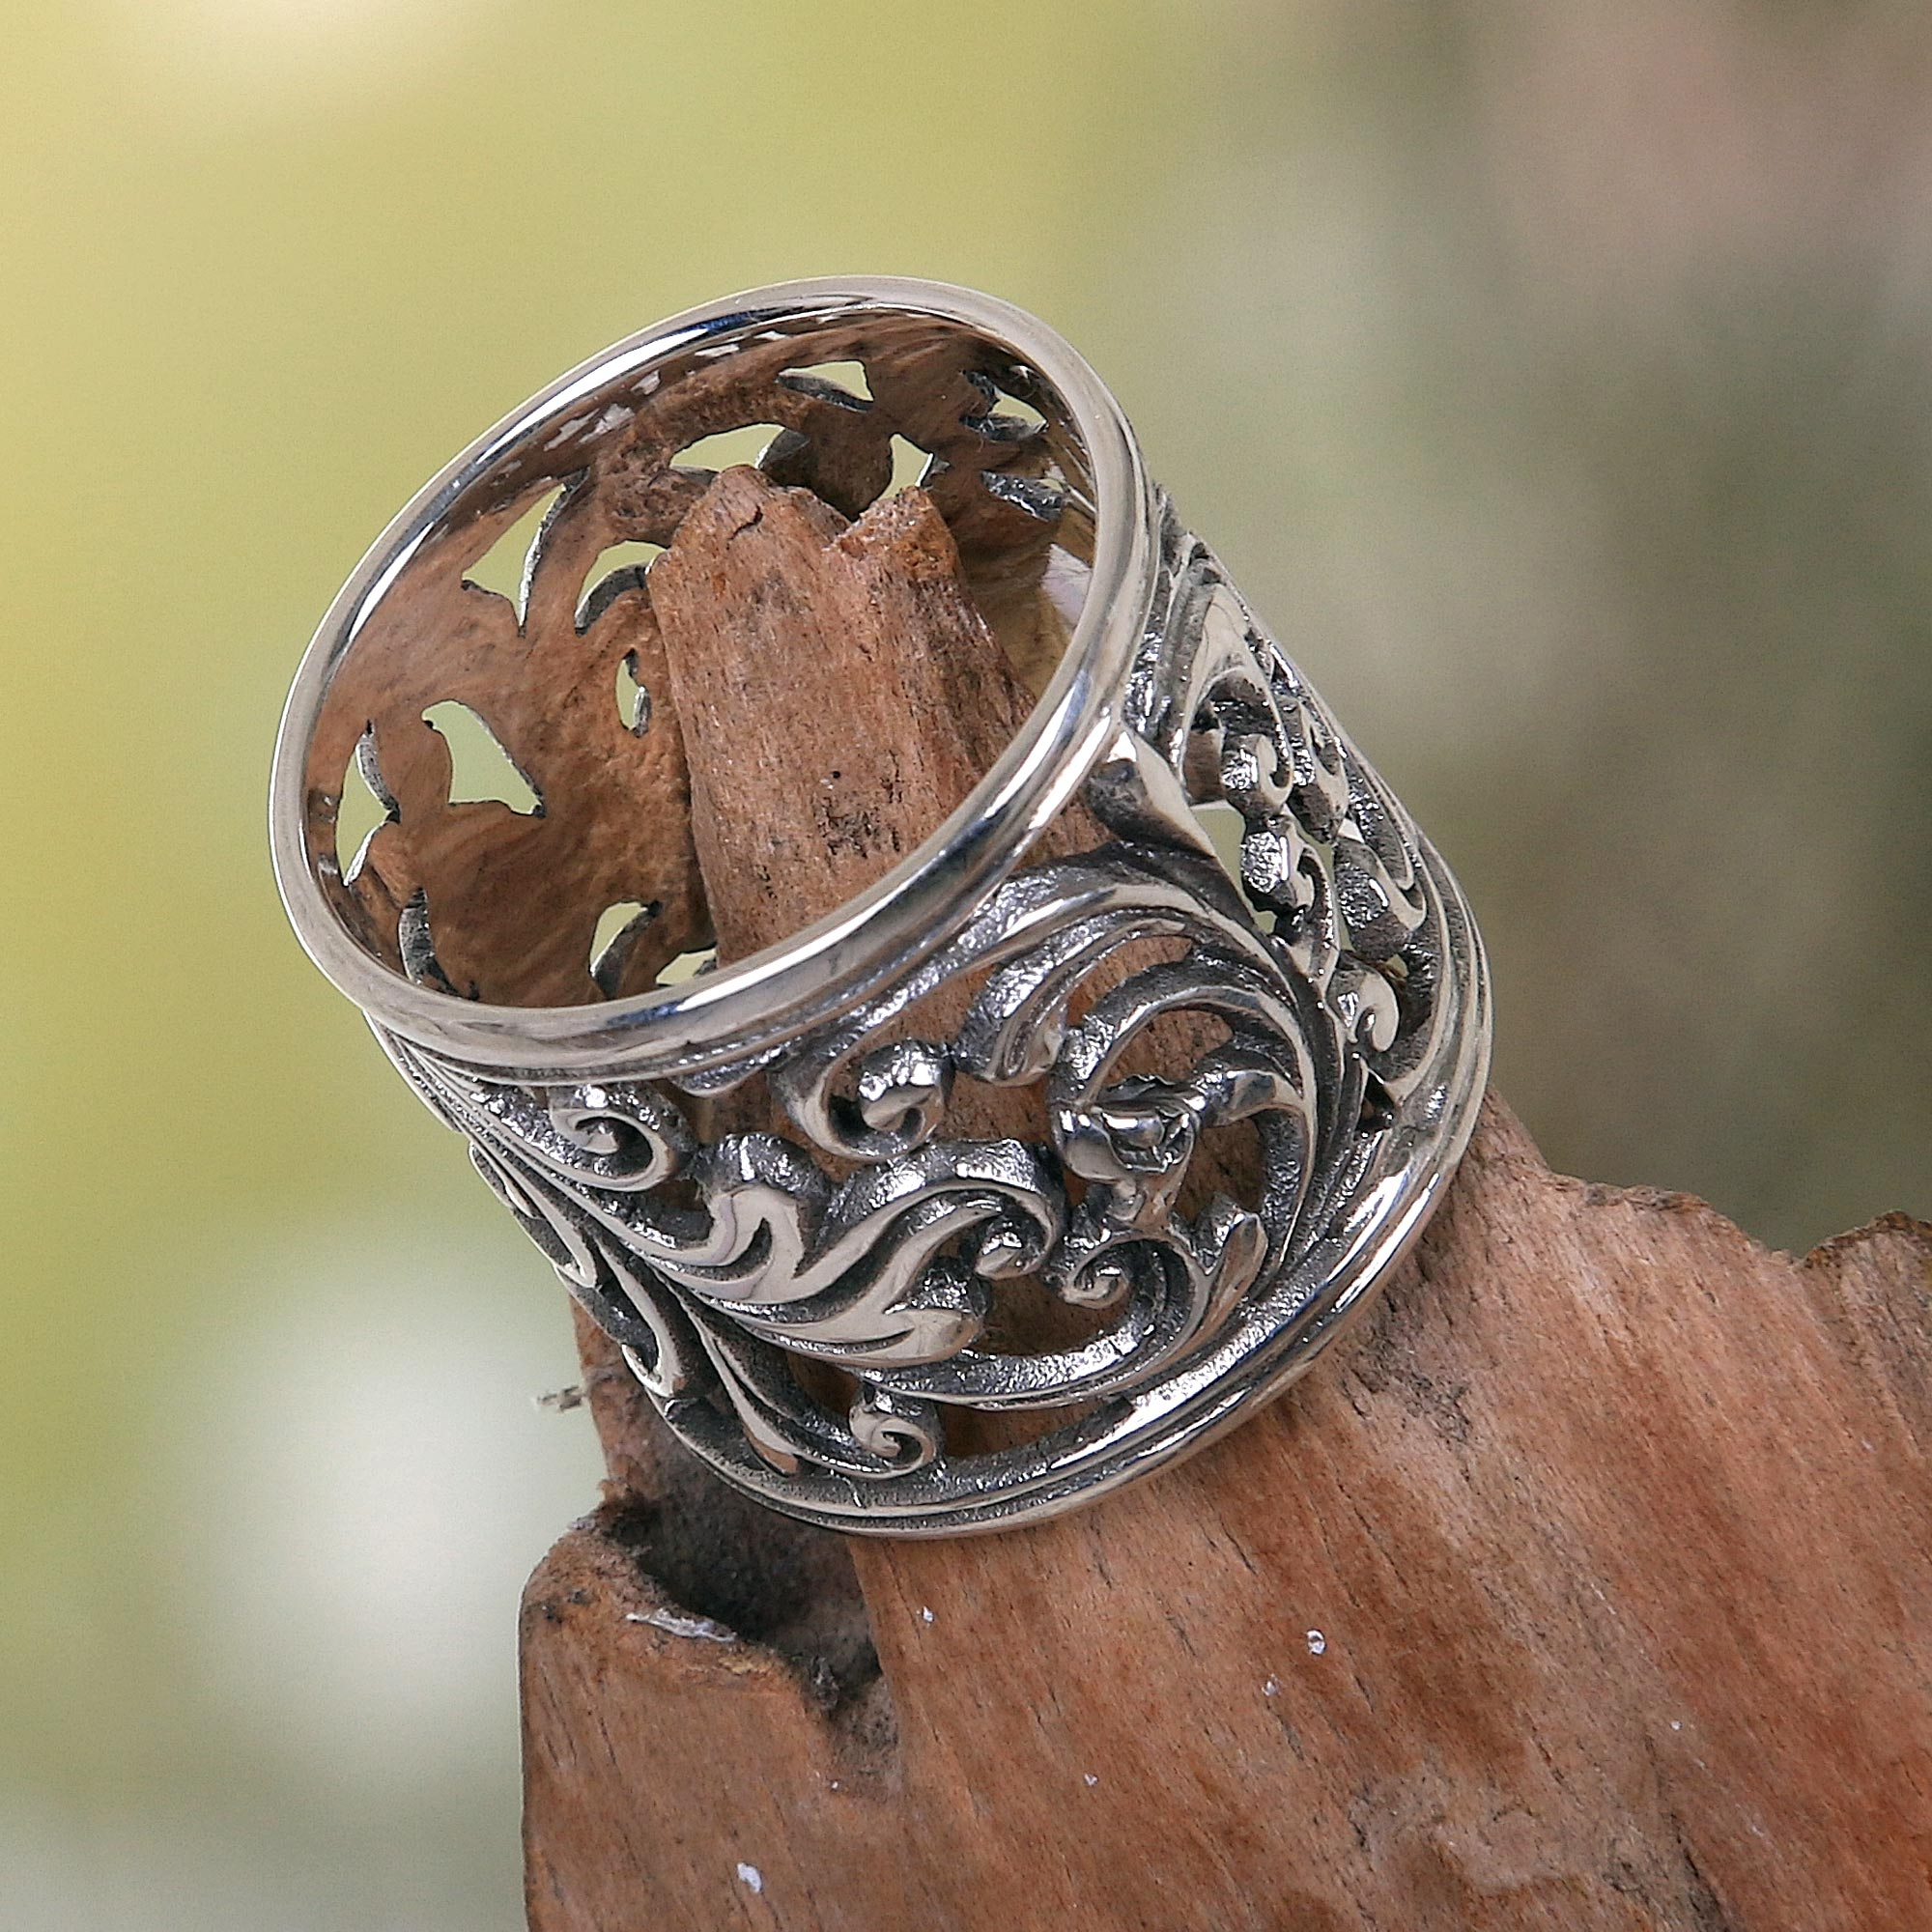 Wavy Sterling Silver Wide Band Ring with Gemstone Accents - Aries Artistic  Jewelry